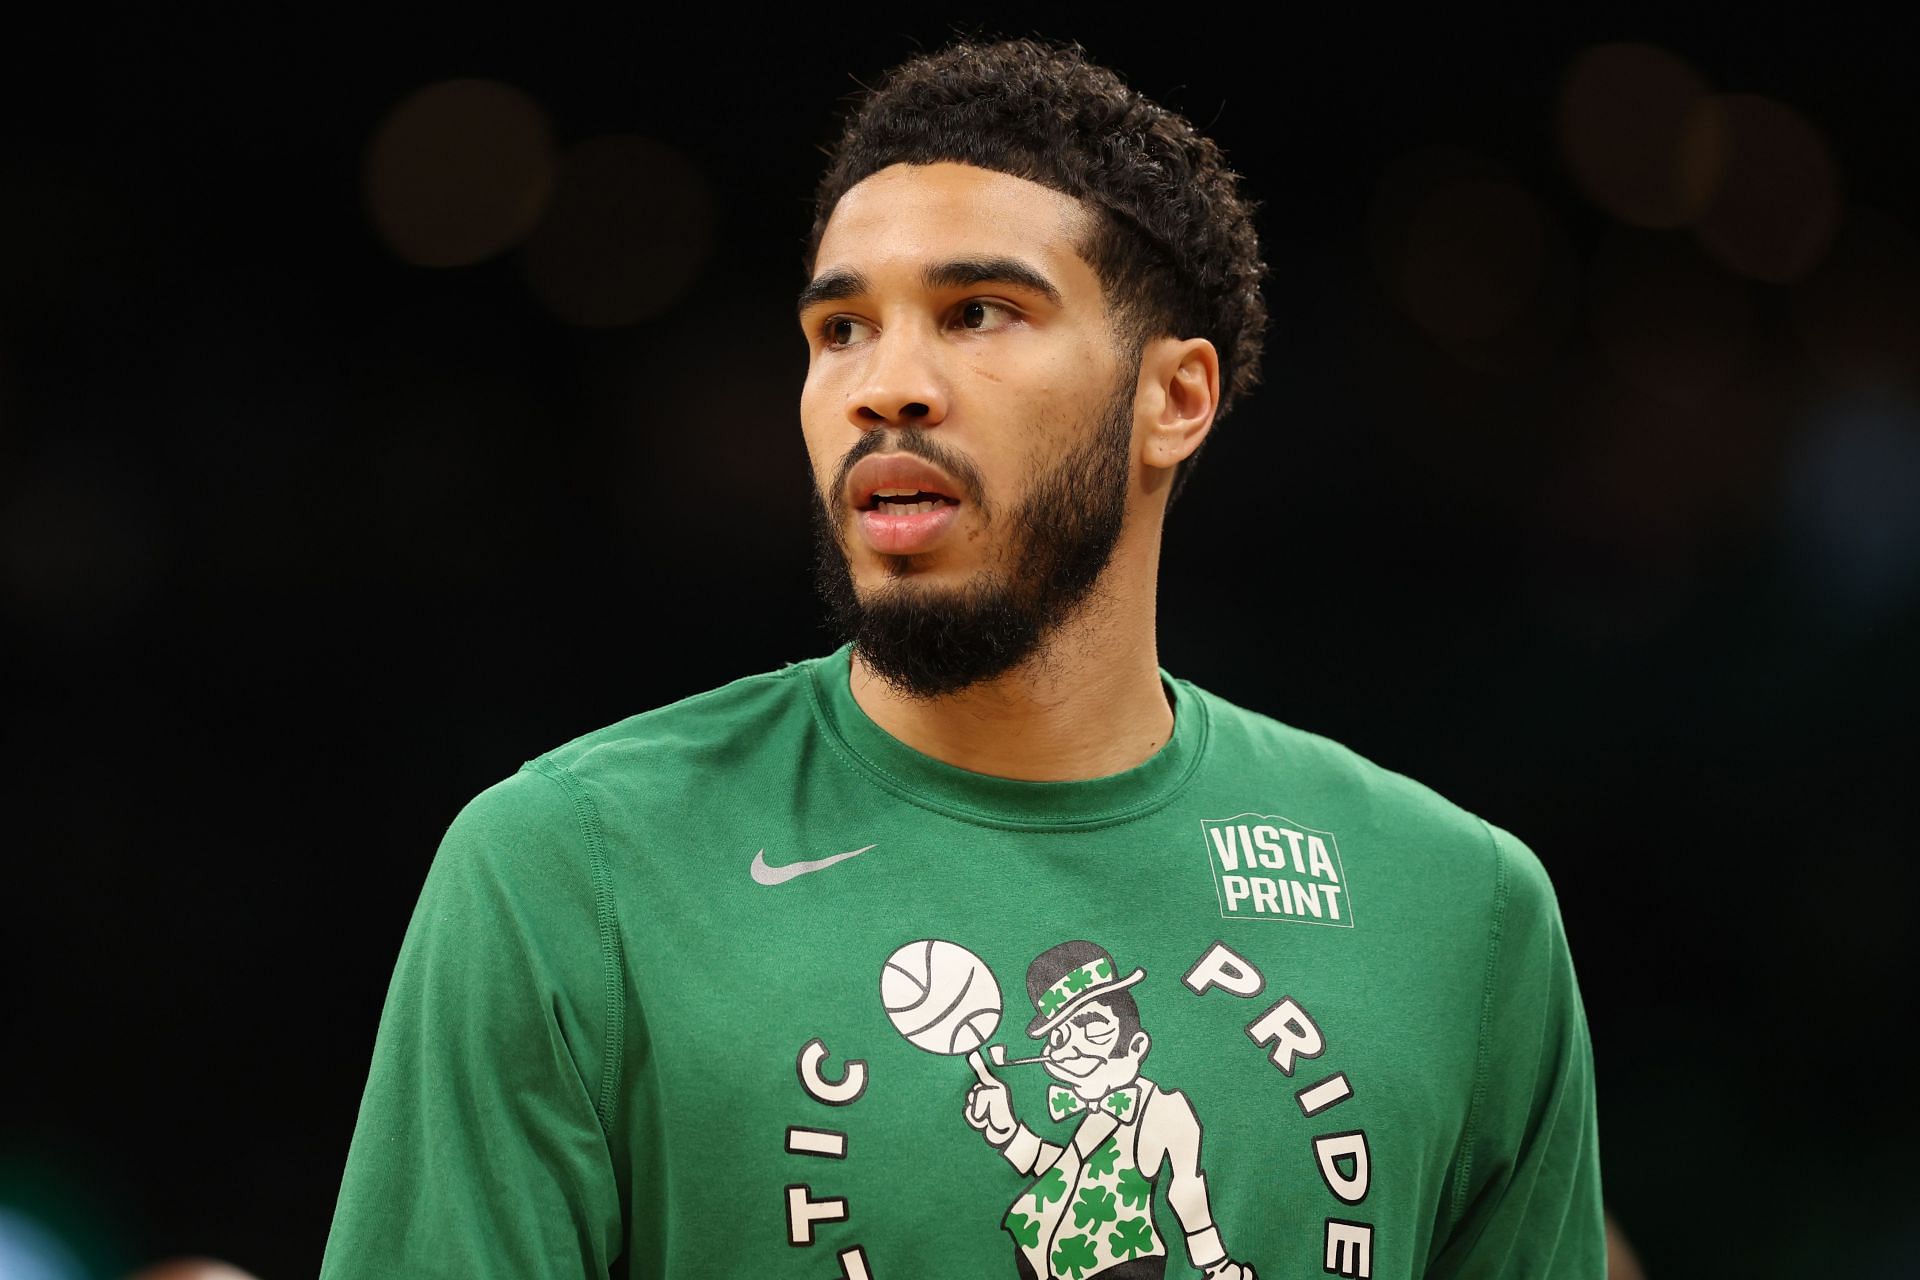 What are Jayson Tatum's stats against Miami Heat?